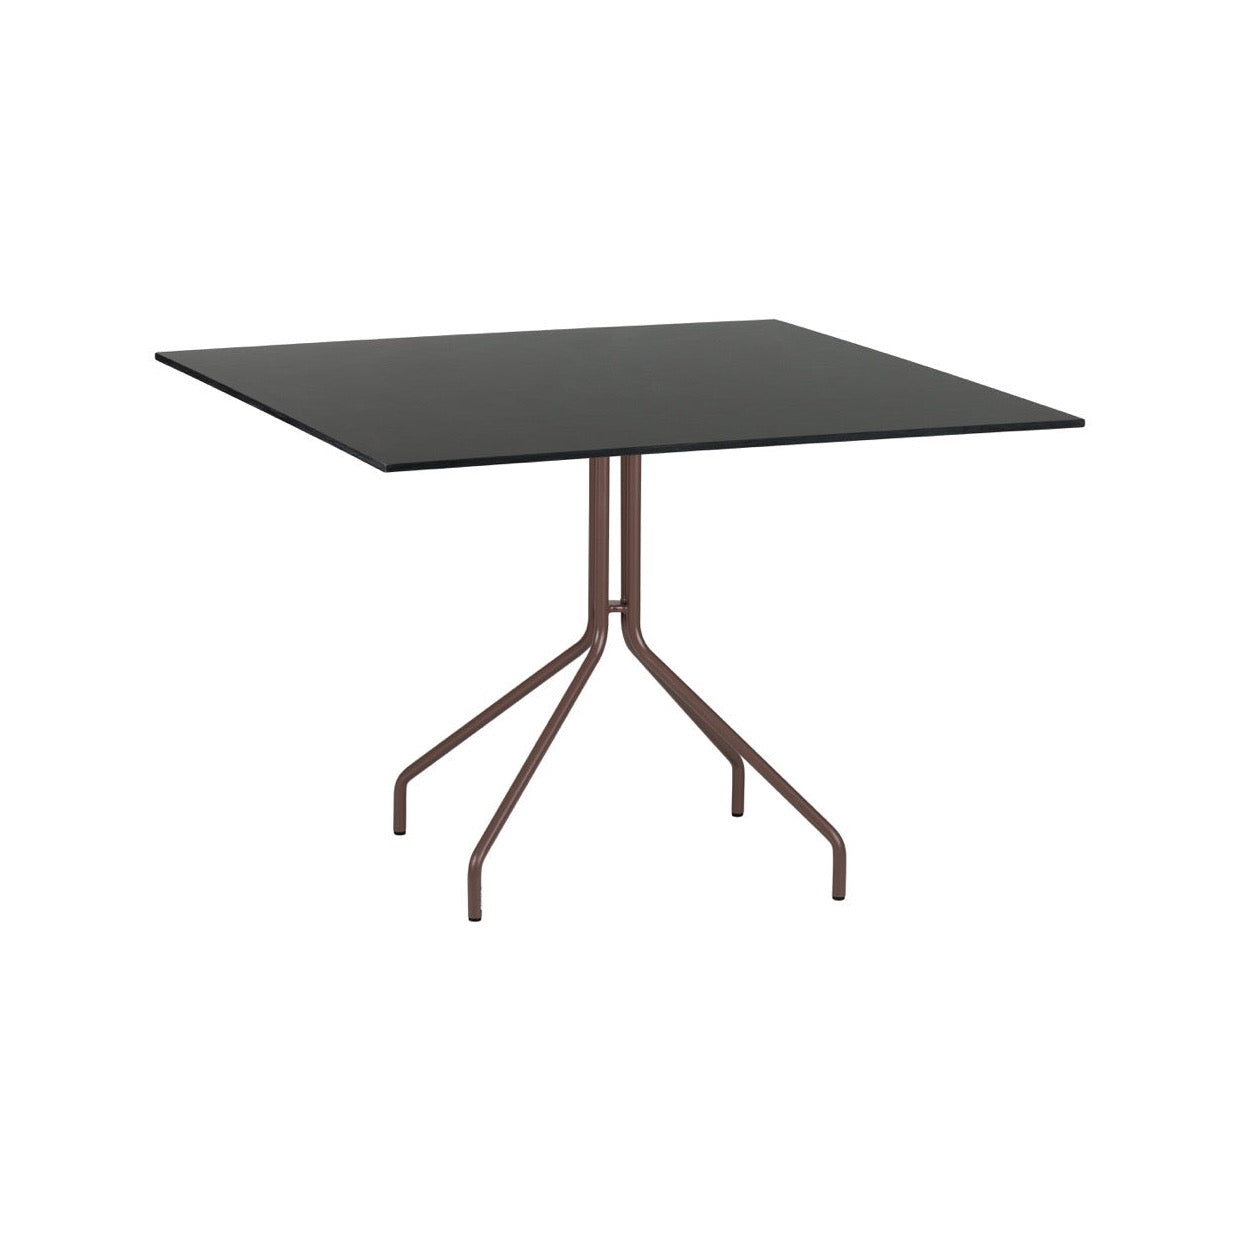 Weave dining table 70 cm